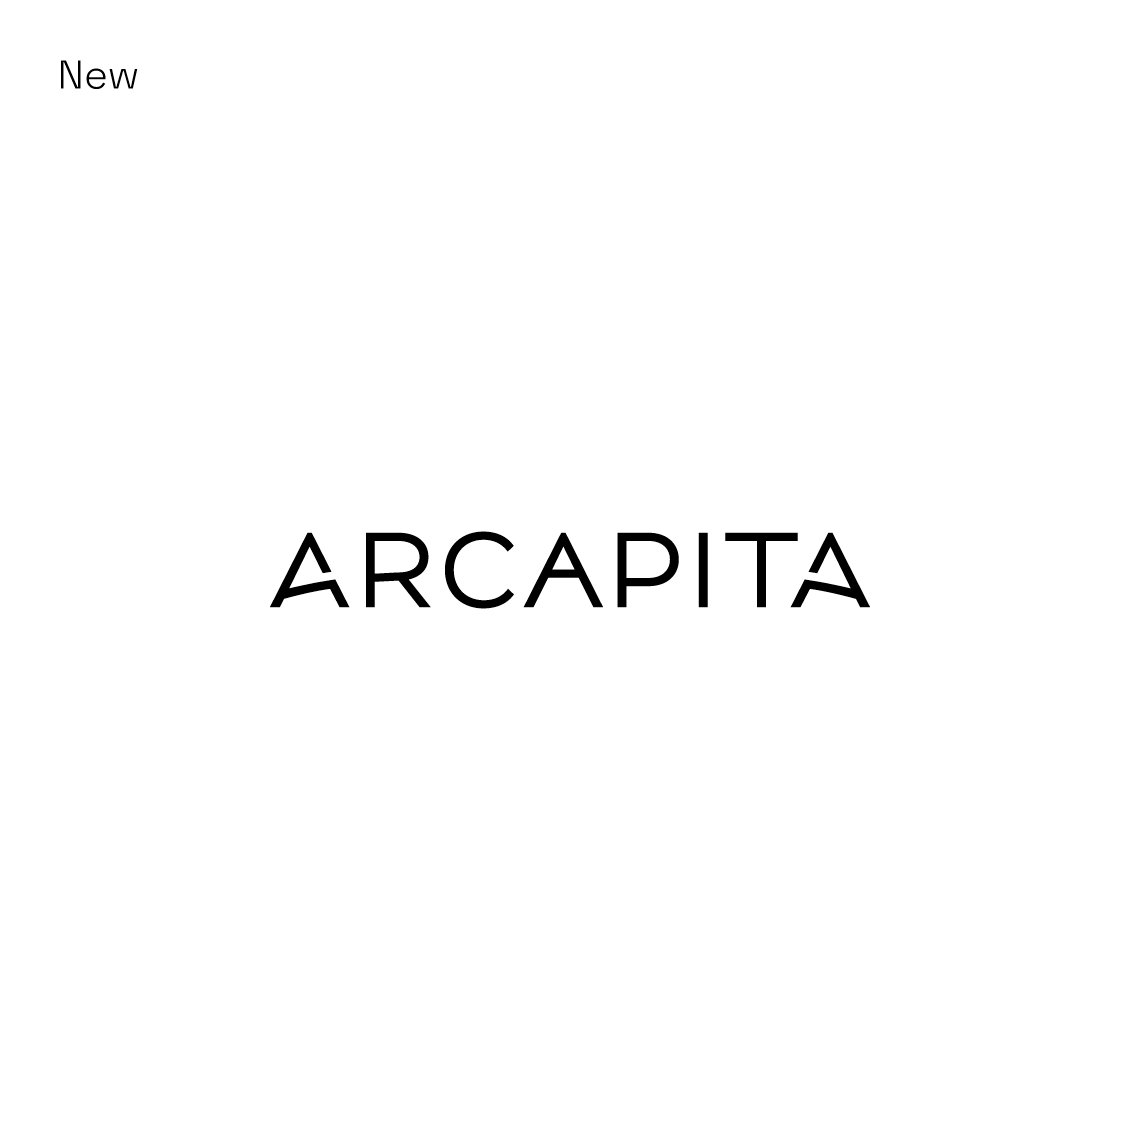 New Arcapita brand identity that combined some legacy elements with a new modern look